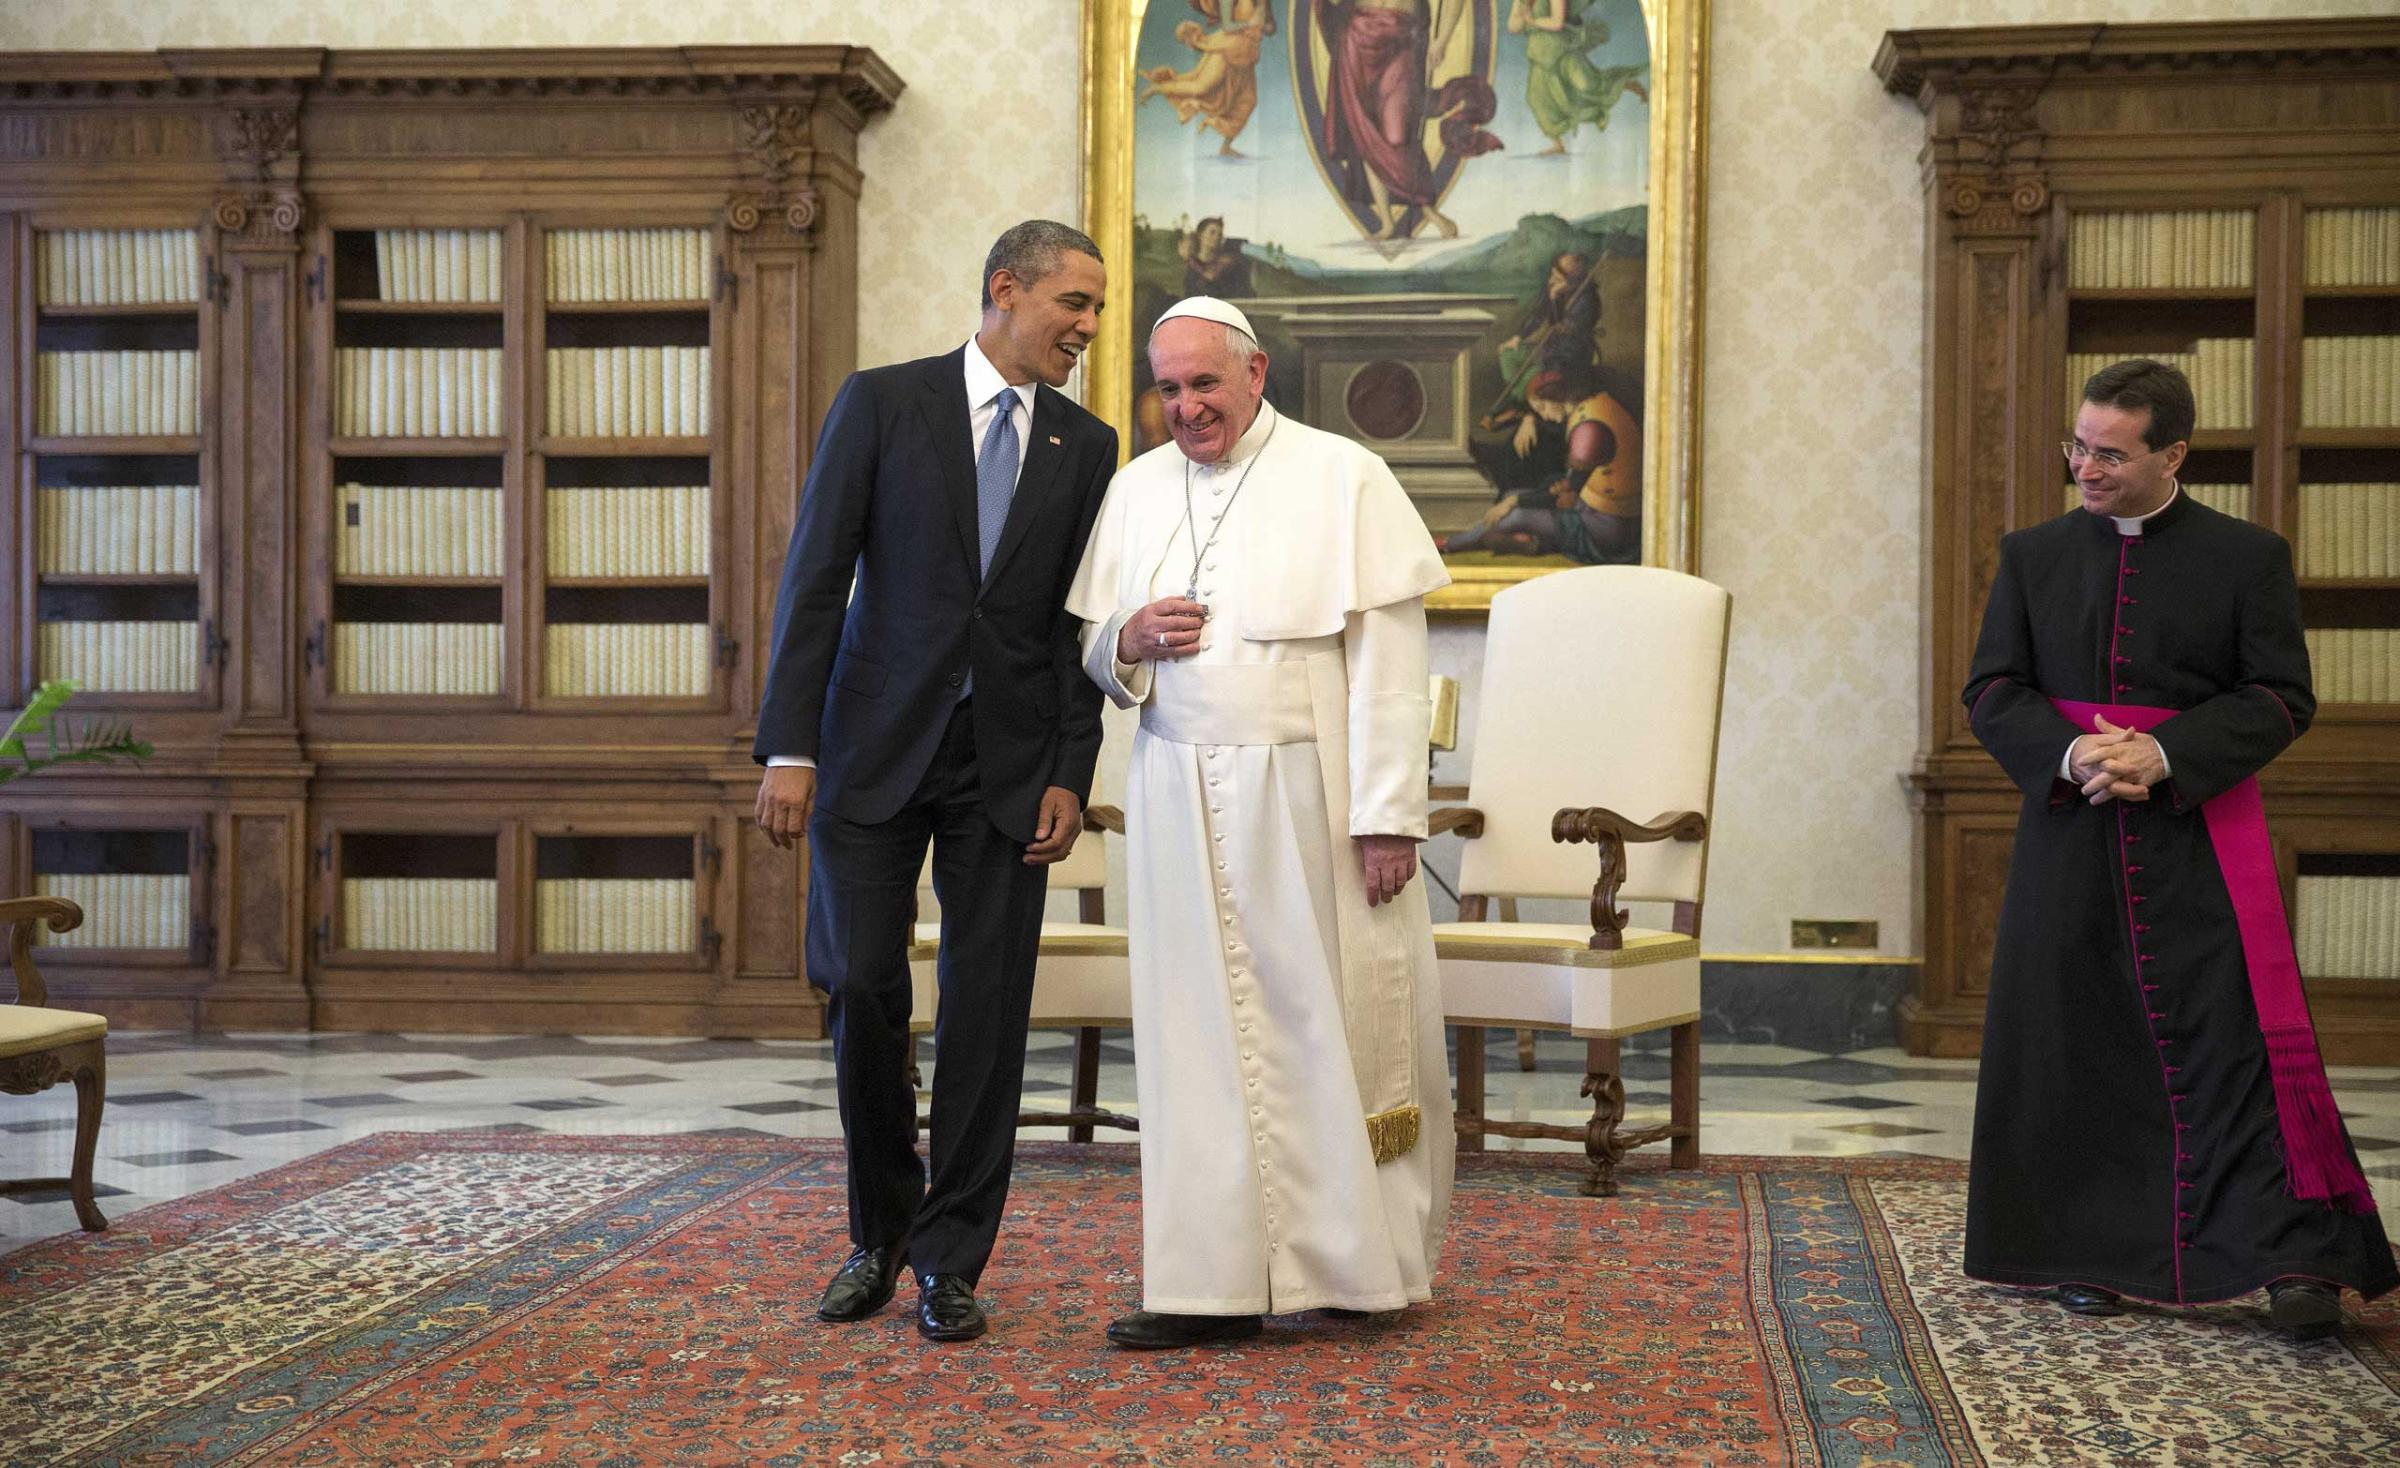 President Barack Obama jokes with Pope Francis at the Vatican.